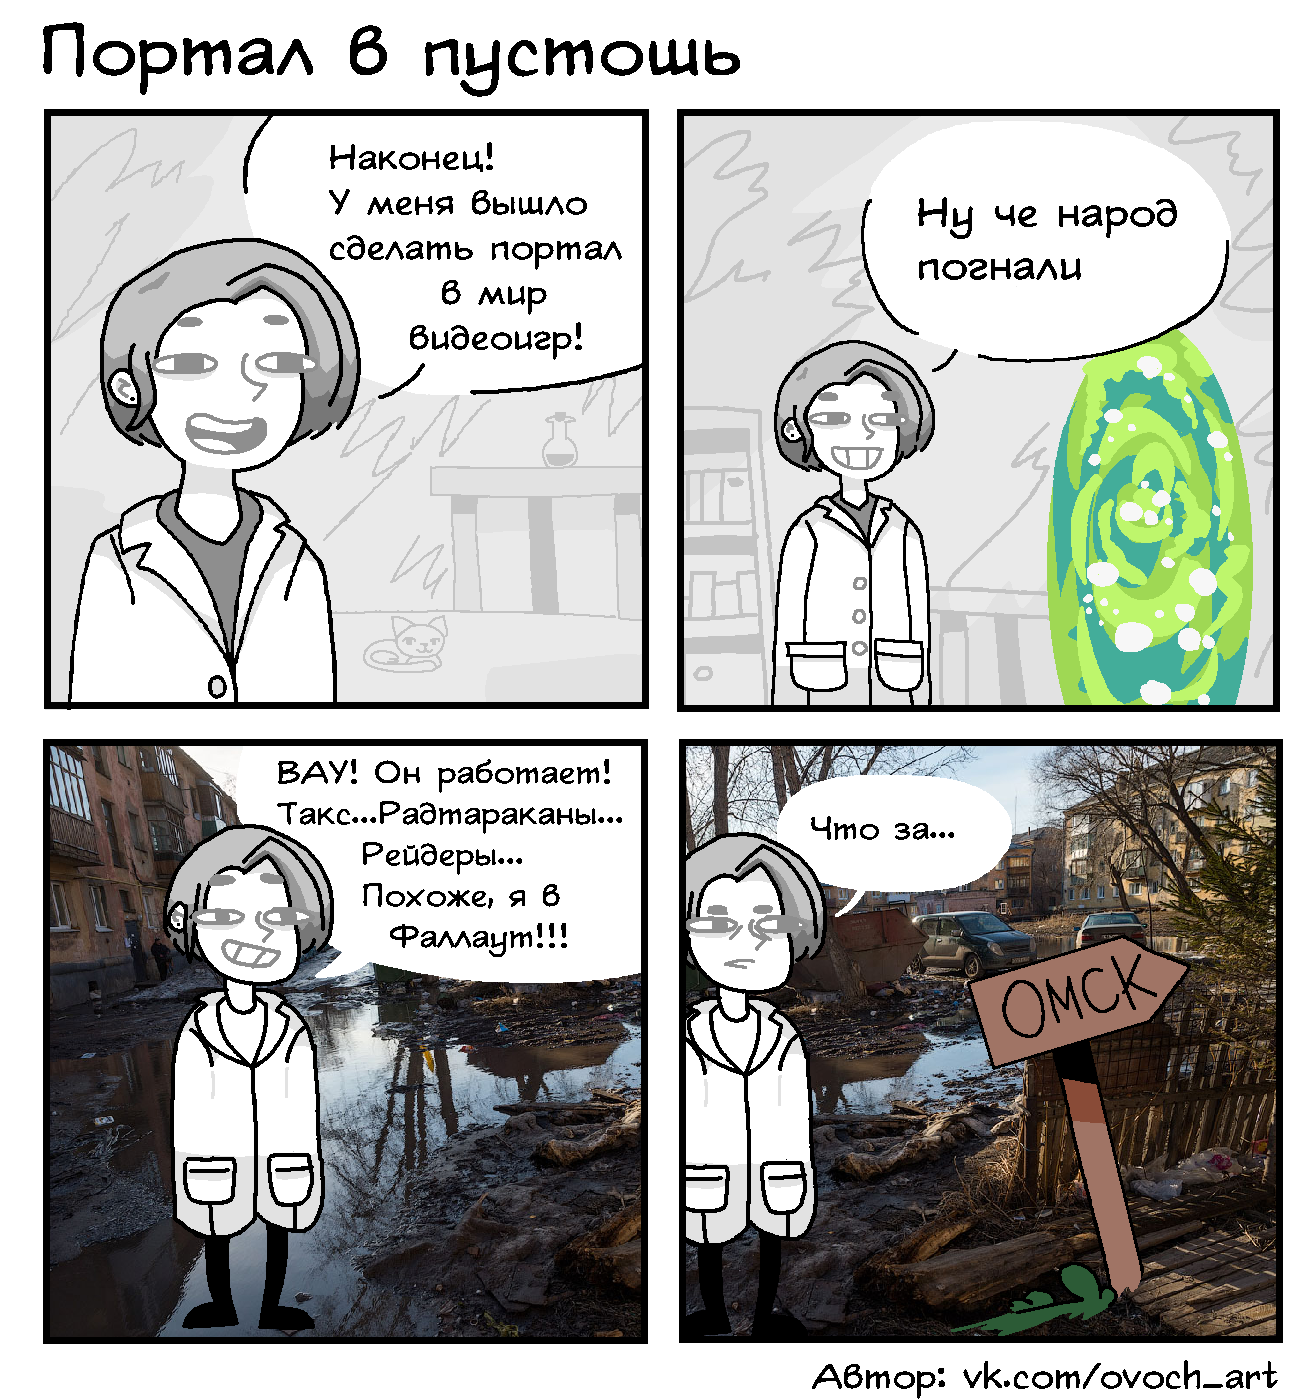 Portal to the Wasteland - My, Wasteland, Omsk, Comics, , Portal, Fallout, Vegetables